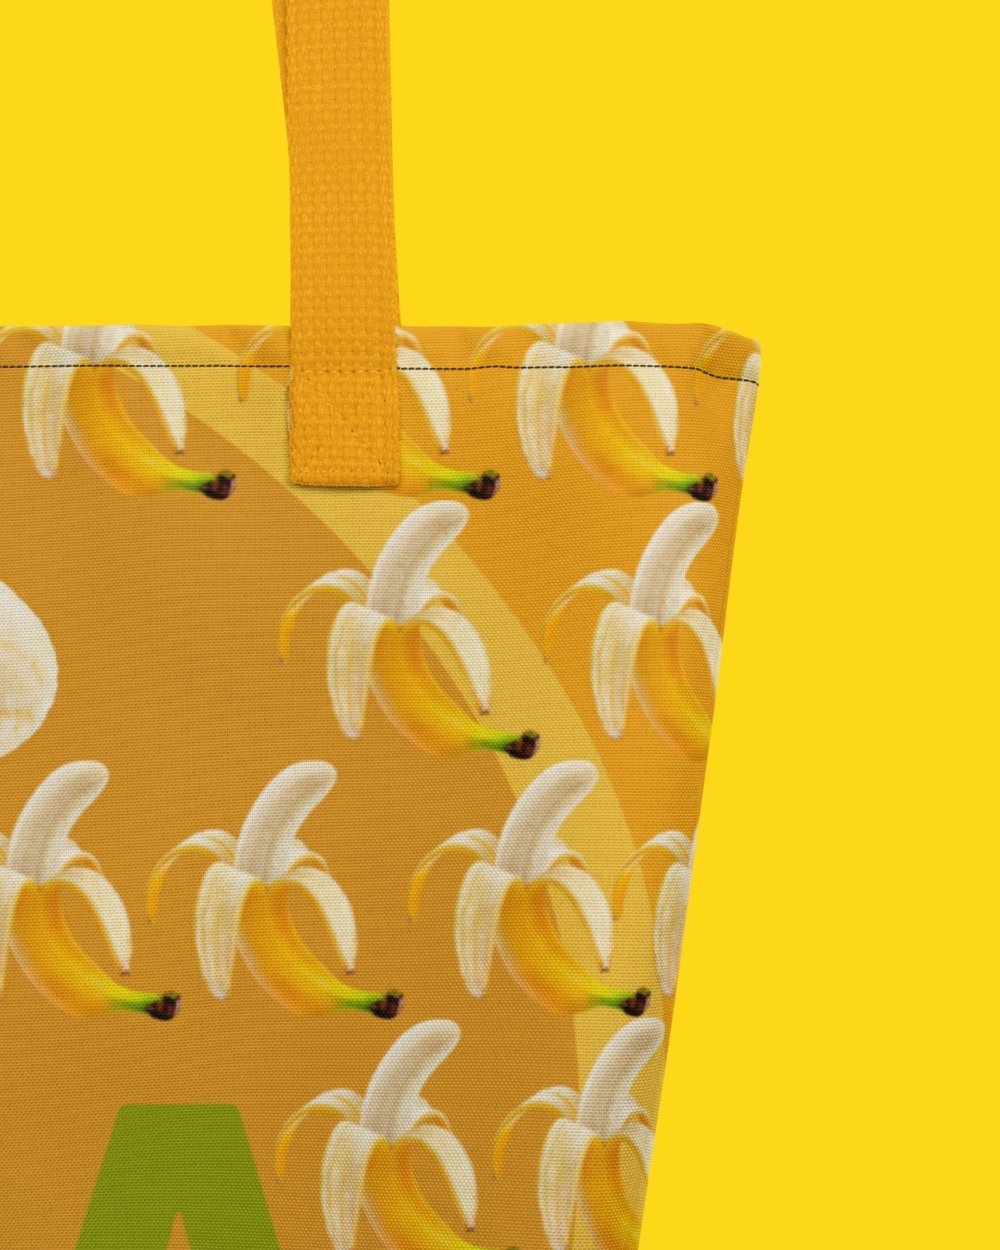 The photo shows a shopping bag style bag that has "ca zzo che" and many bananas printed on it. You can buy this stylish bag design here in the "LA BELLA VITA club".  The main colours are yellow.